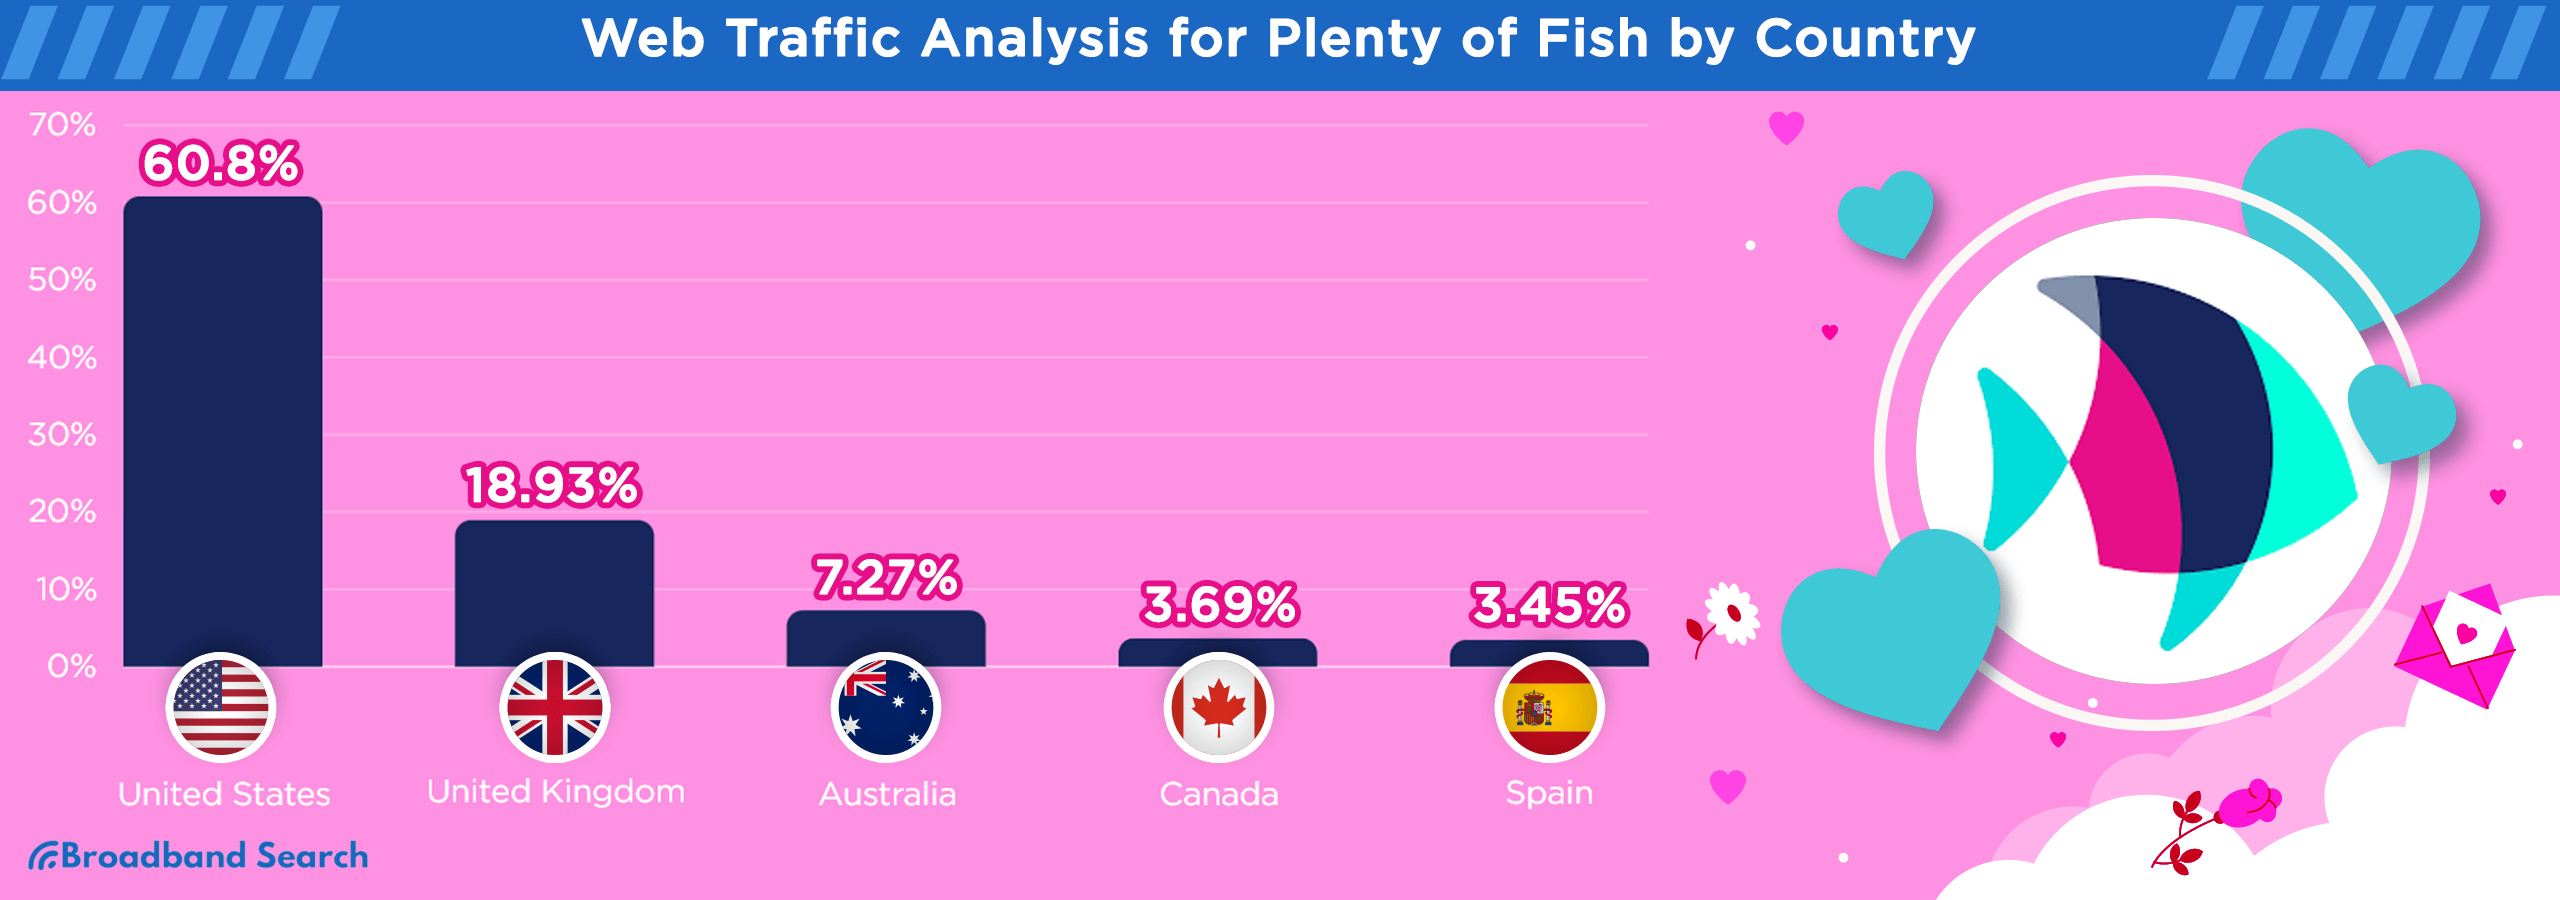 Web traffic analysis for plenty of fish by country